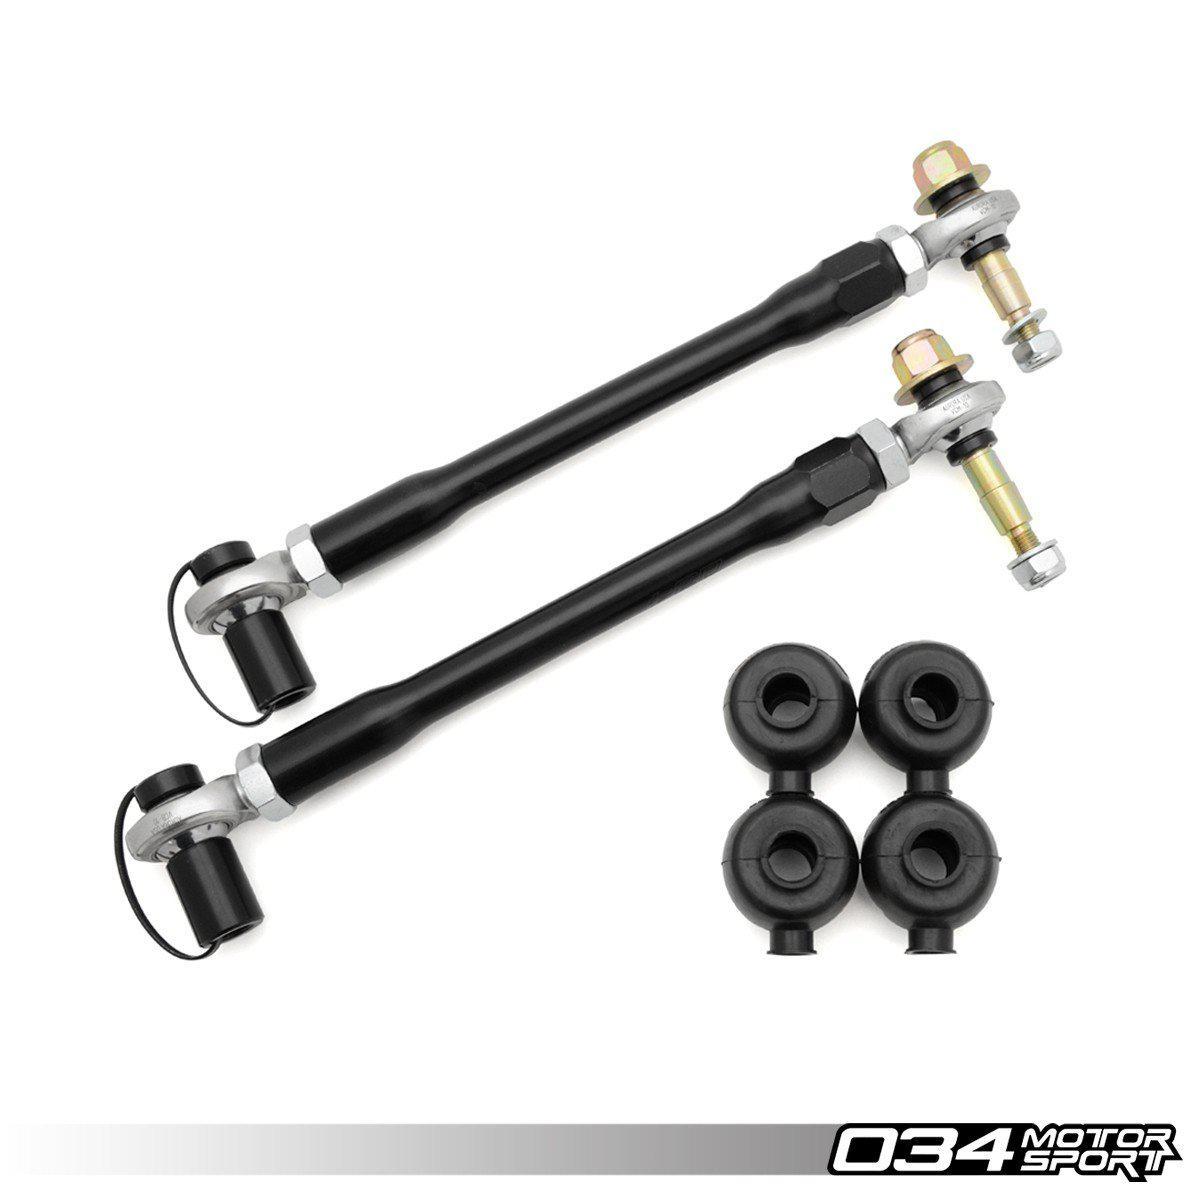 Tie Rod Set, Rear, B4/B5 Audi A4/S4/RS4 & 80/90/Rs2, Spherical-A Little Tuning Co